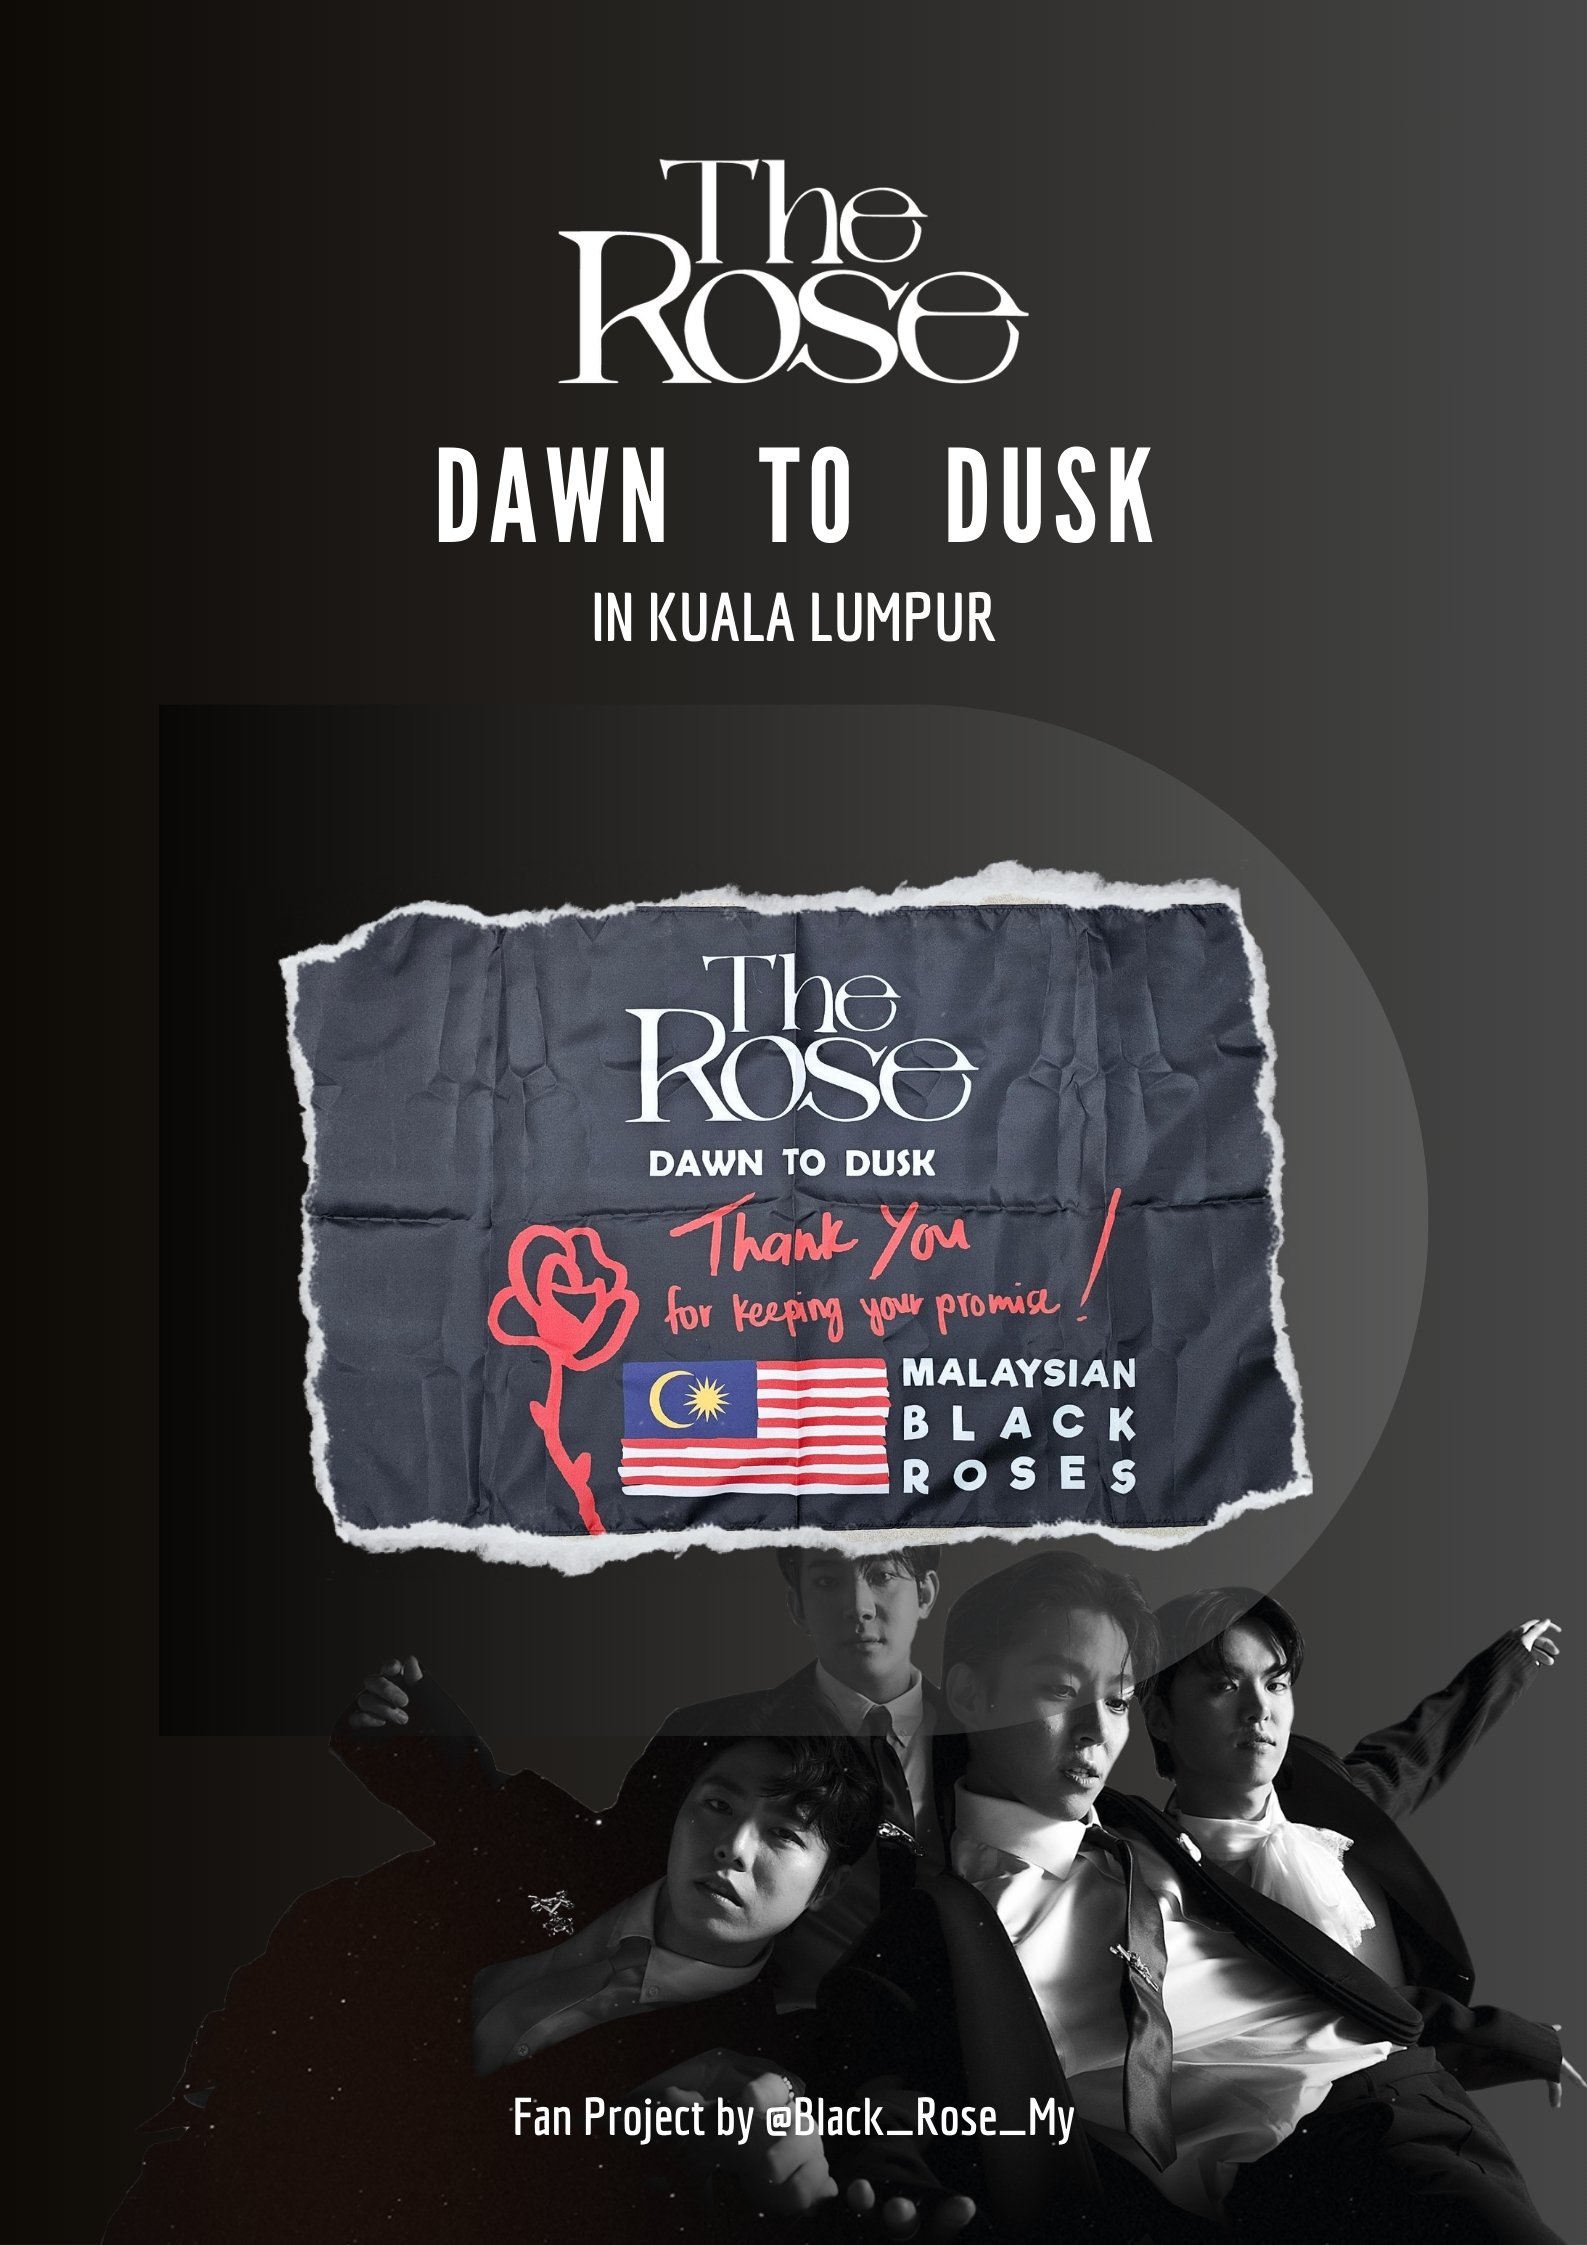 Catching Up With The Rose During Their 'Dawn to Dusk' Tour